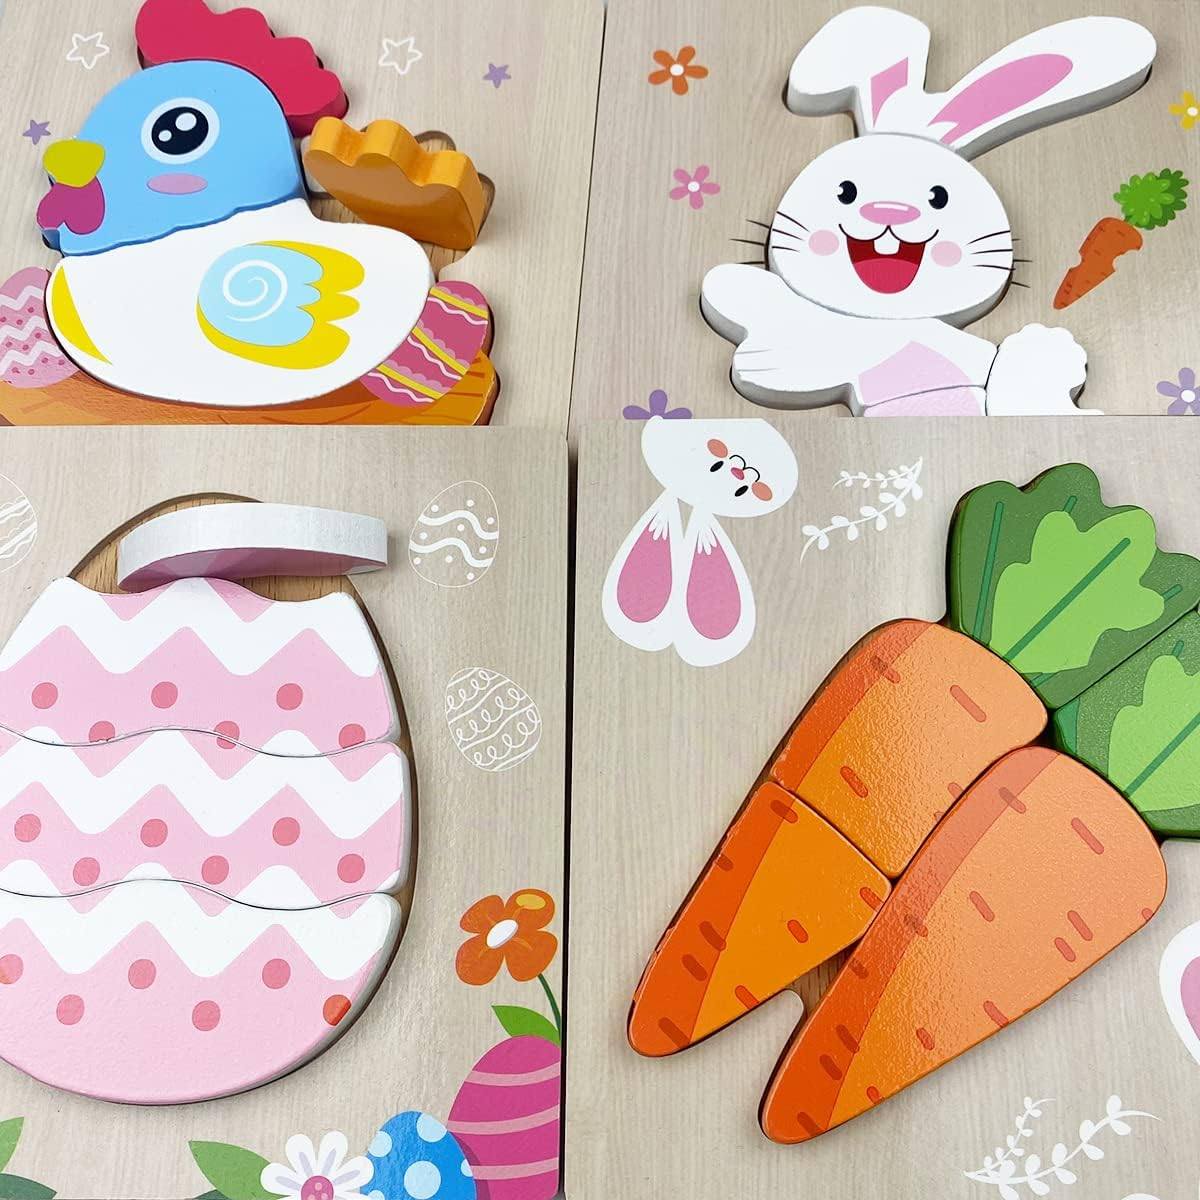 Colorful Montessori Easter Wooden Puzzles (4 Pack) and decorations, including a blue bird, a white bunny, a pink patterned egg, and a carrot, arranged on a wooden surface with floral accents by InvenToy.